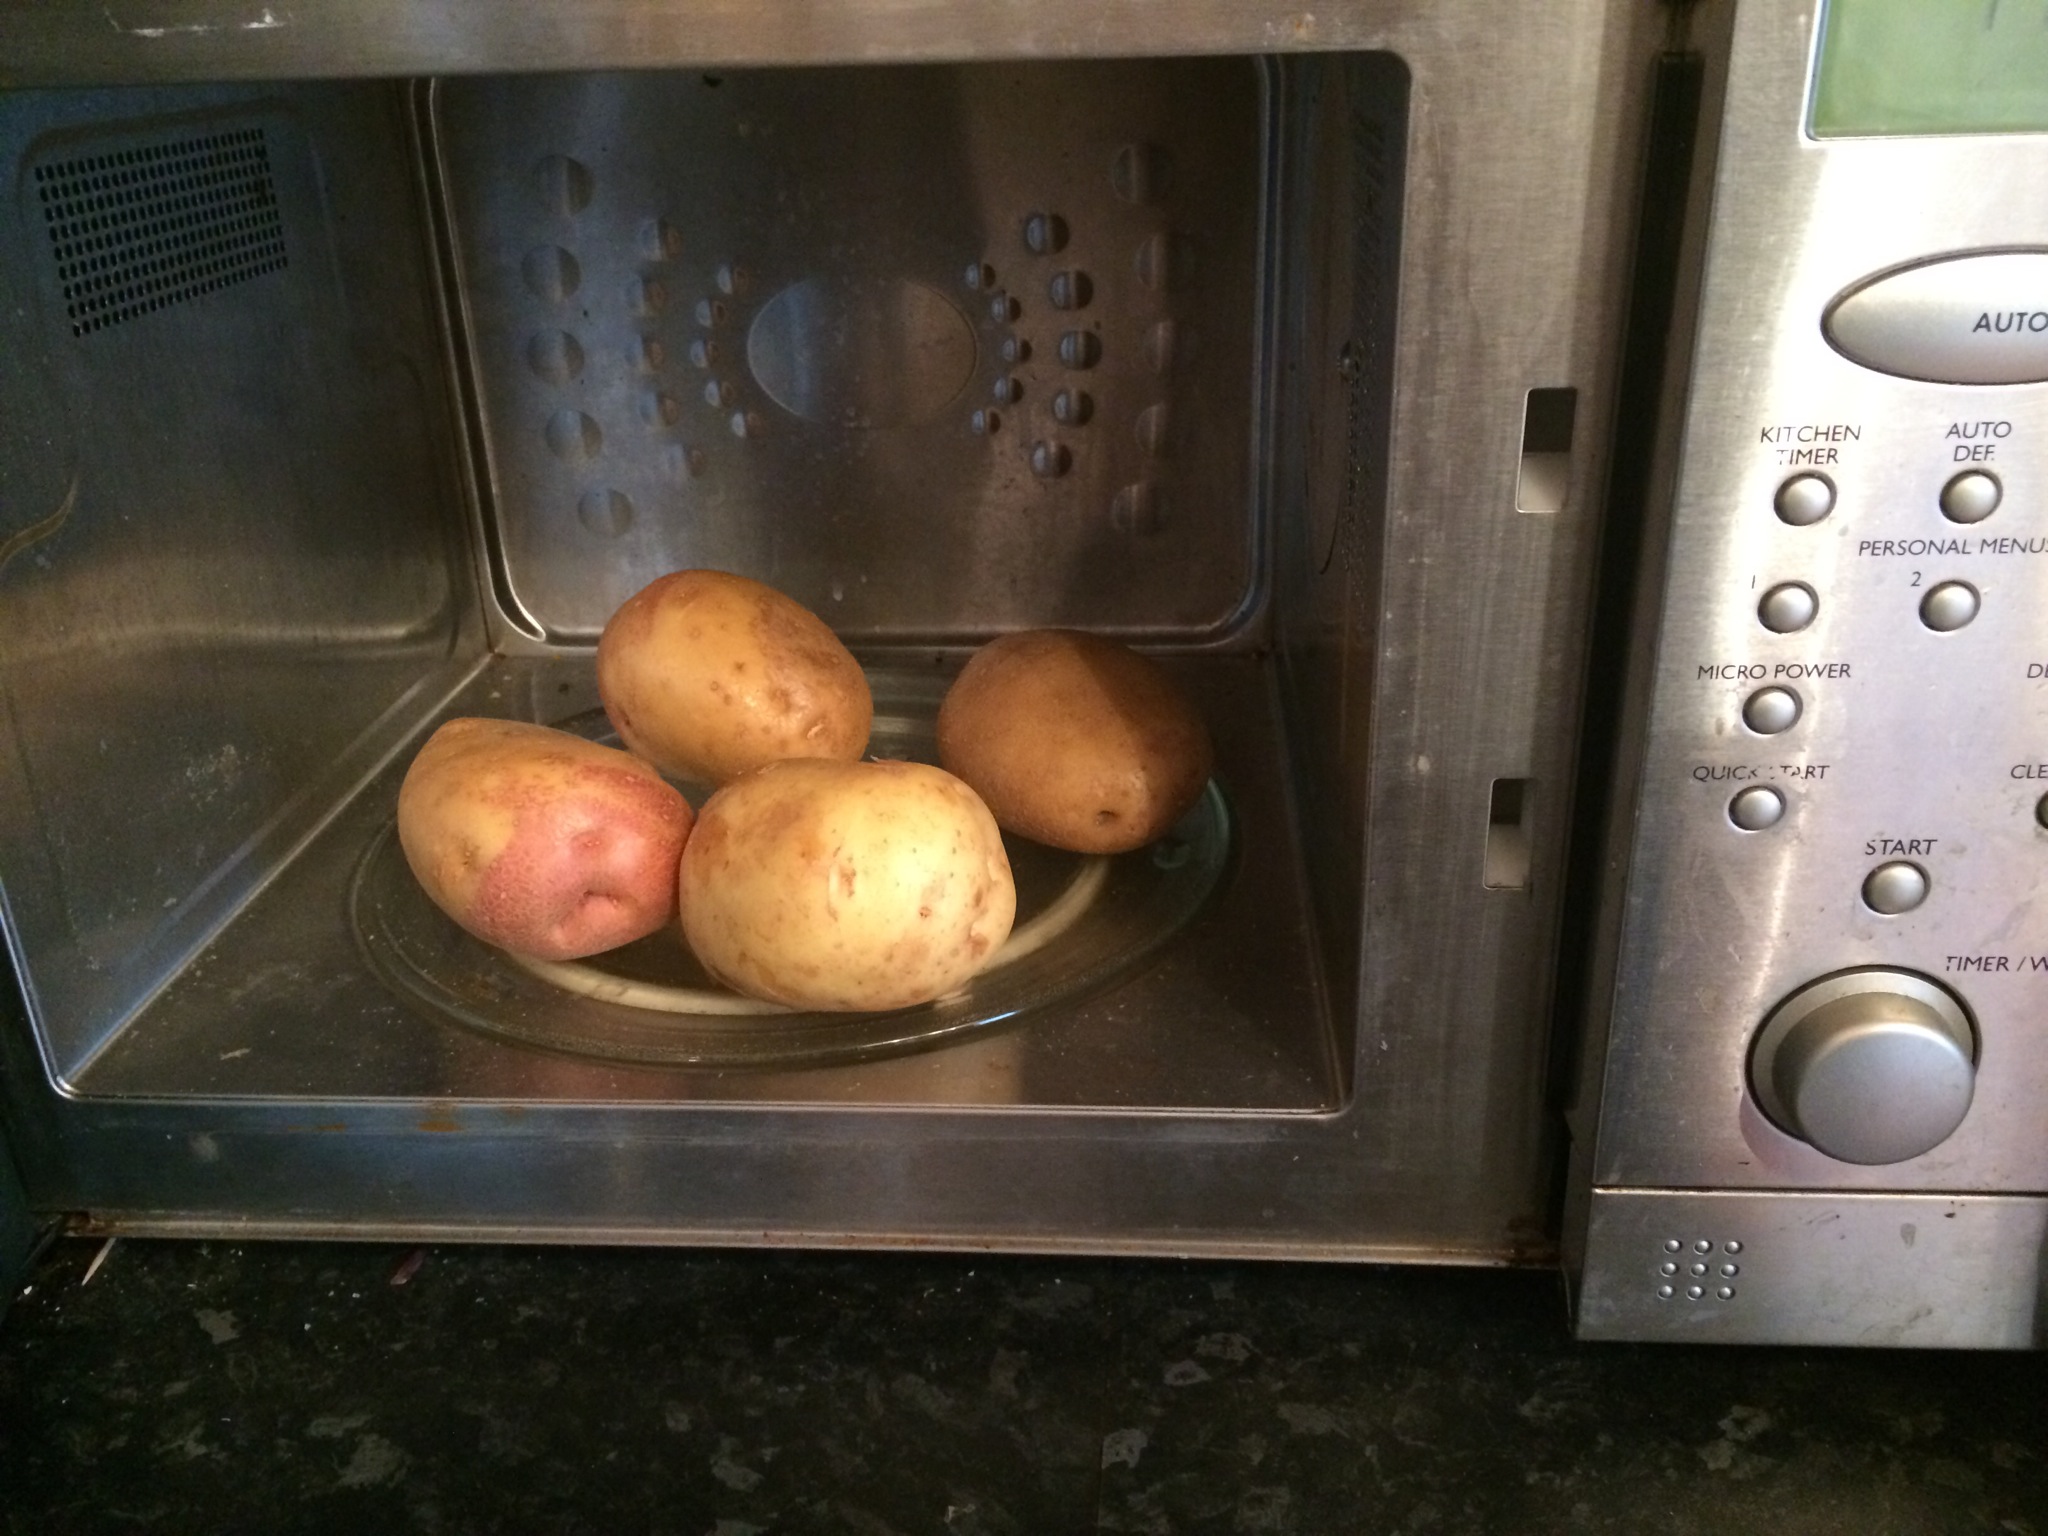 Pop the potatoes in the microwave, whole, for about 6-7 minutes. You want them just underdone.